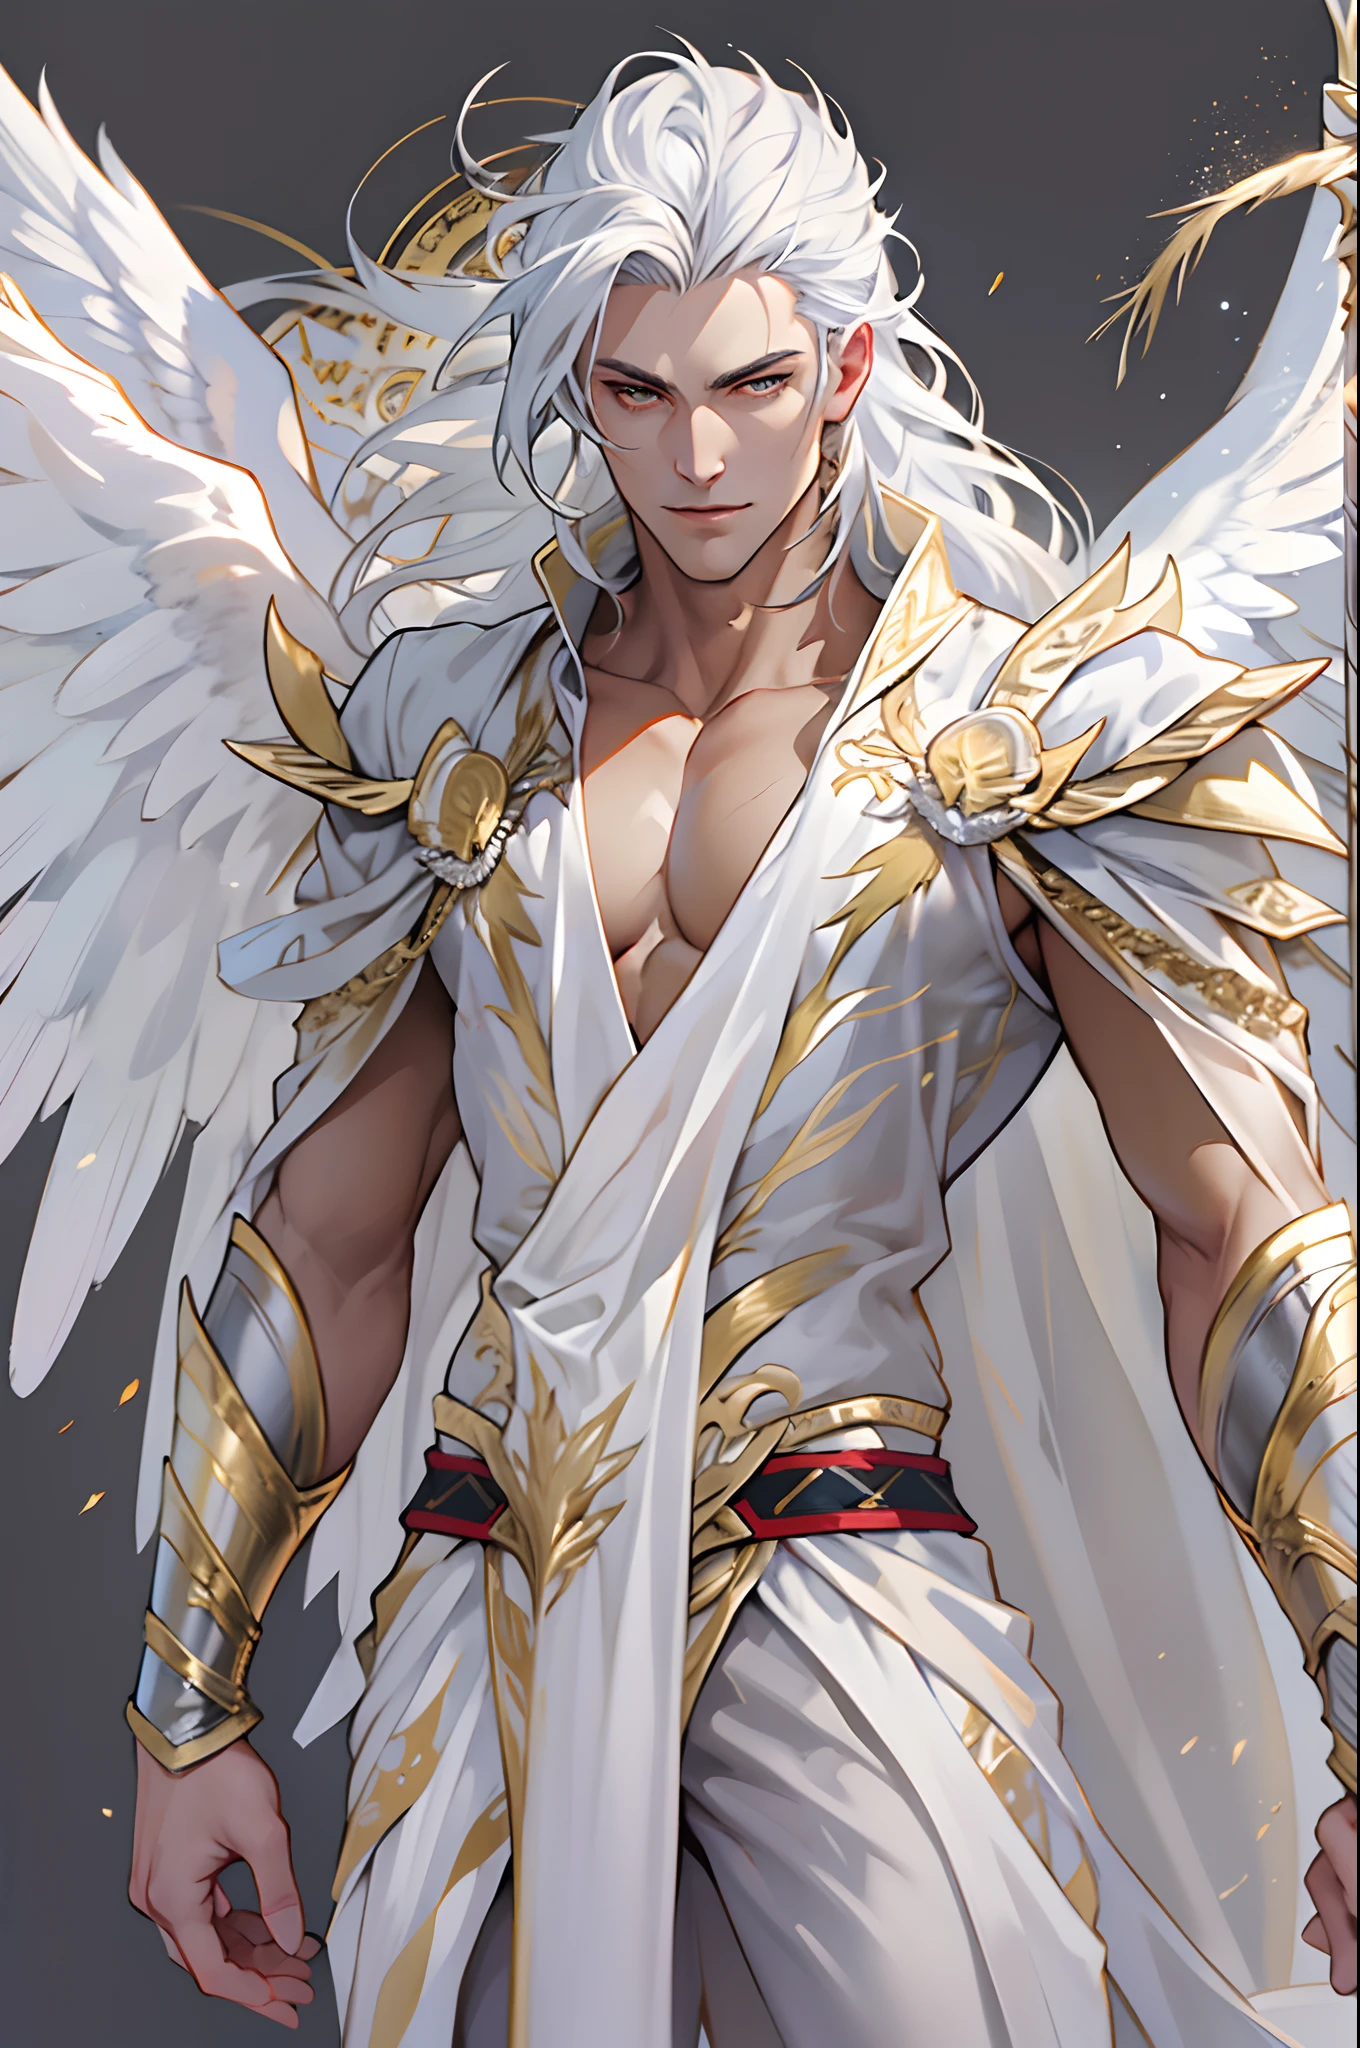 Caius is a handsome male, stands at 7ft tall. He has an athletic body structure. He wears royal attire thats silver and gold. He has beautiful long white silky hair and a golden eye color. He is seen with a staff. He has huge white wings. A big bulge in his pants. White Phoenix human form. His hair is braided back